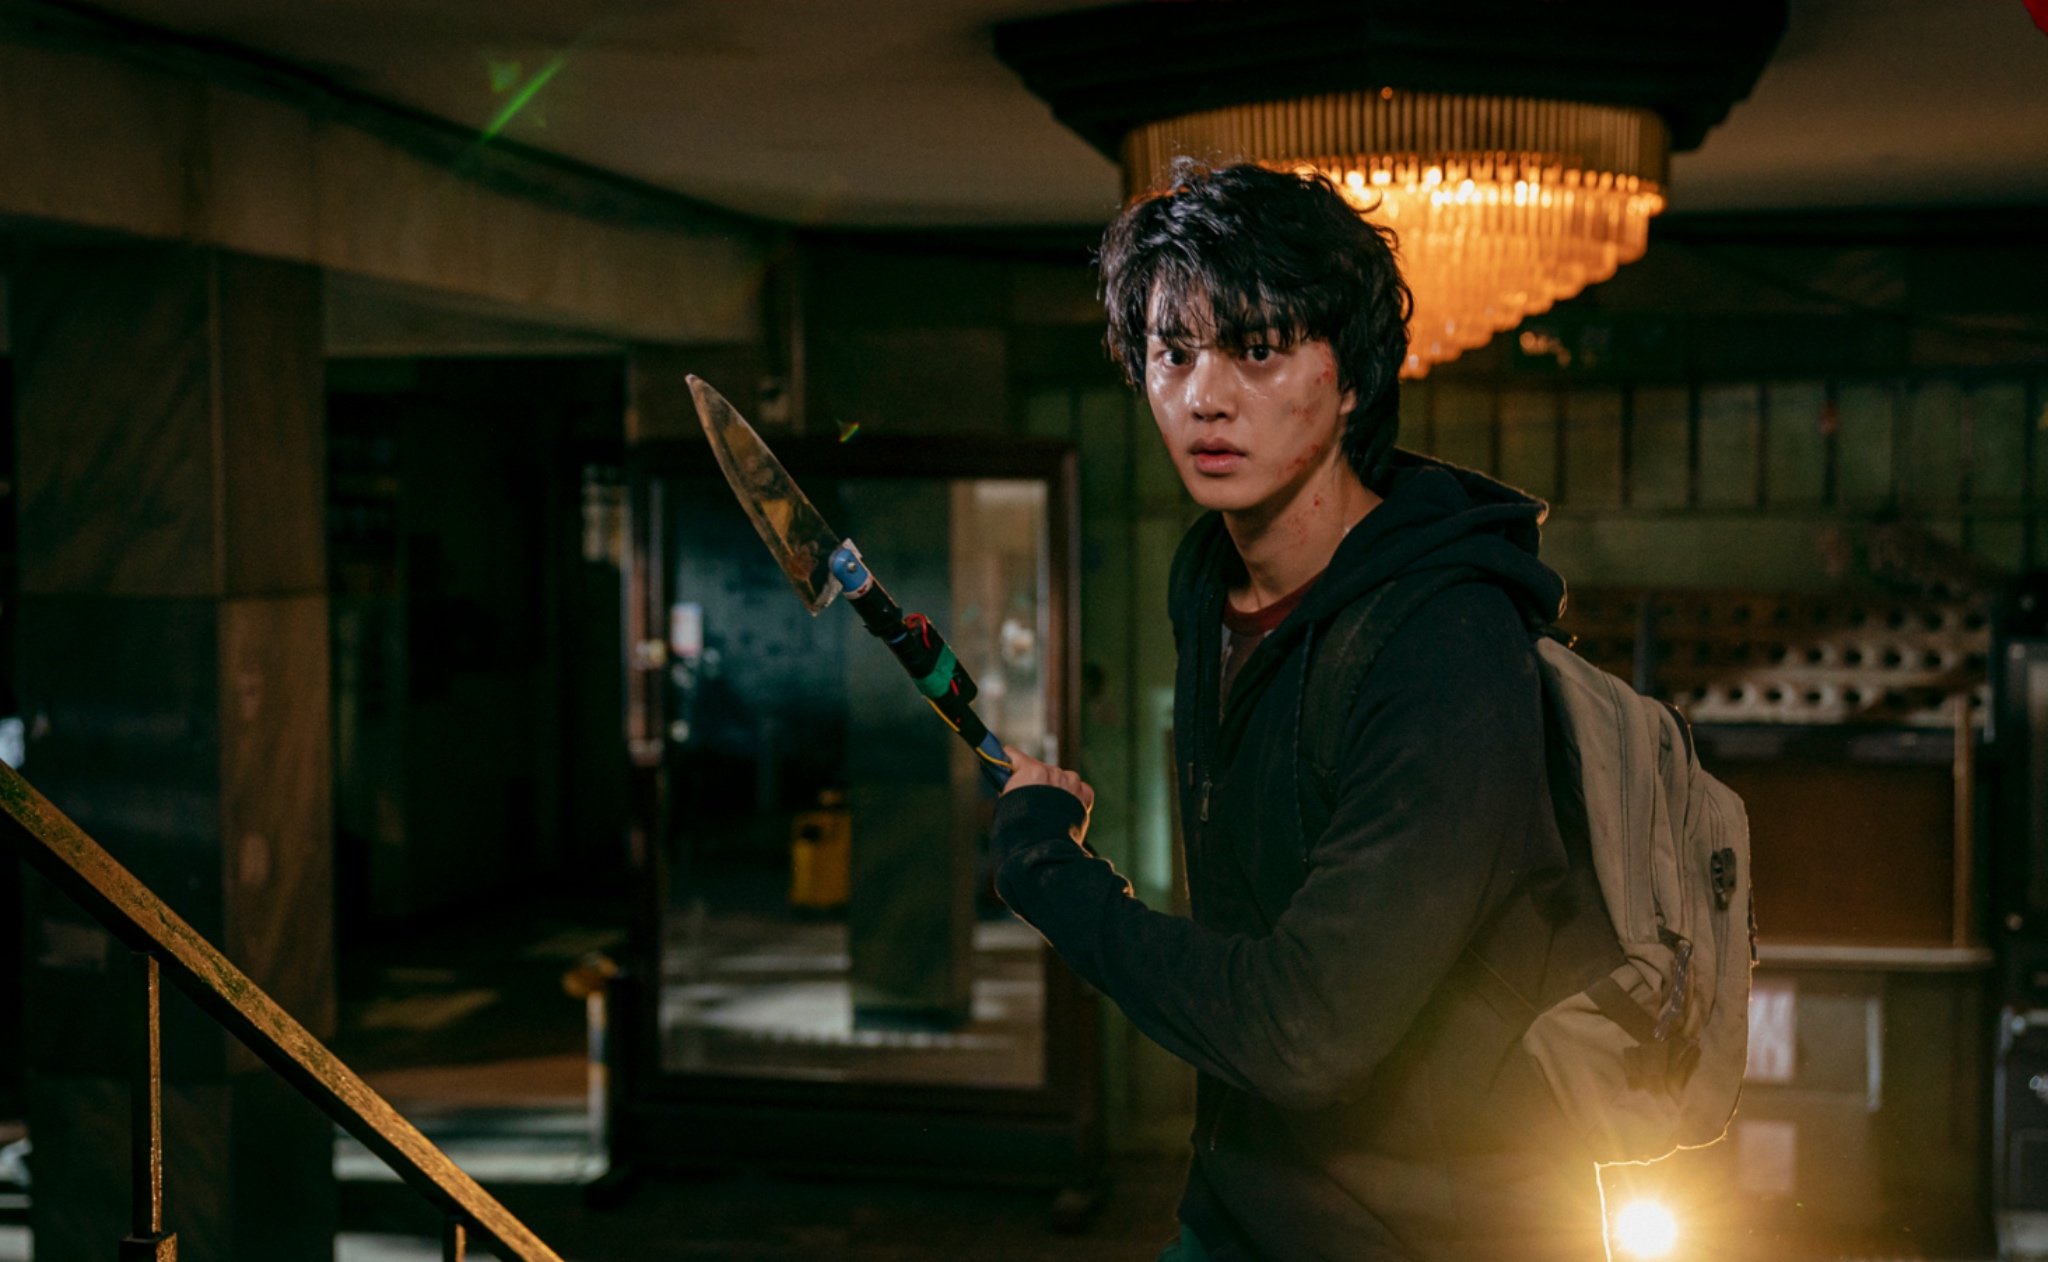 Song Kang as Cha Hyun-too for Netflix 'Sweet Home' K-drama holding knife weapon in destroyed room